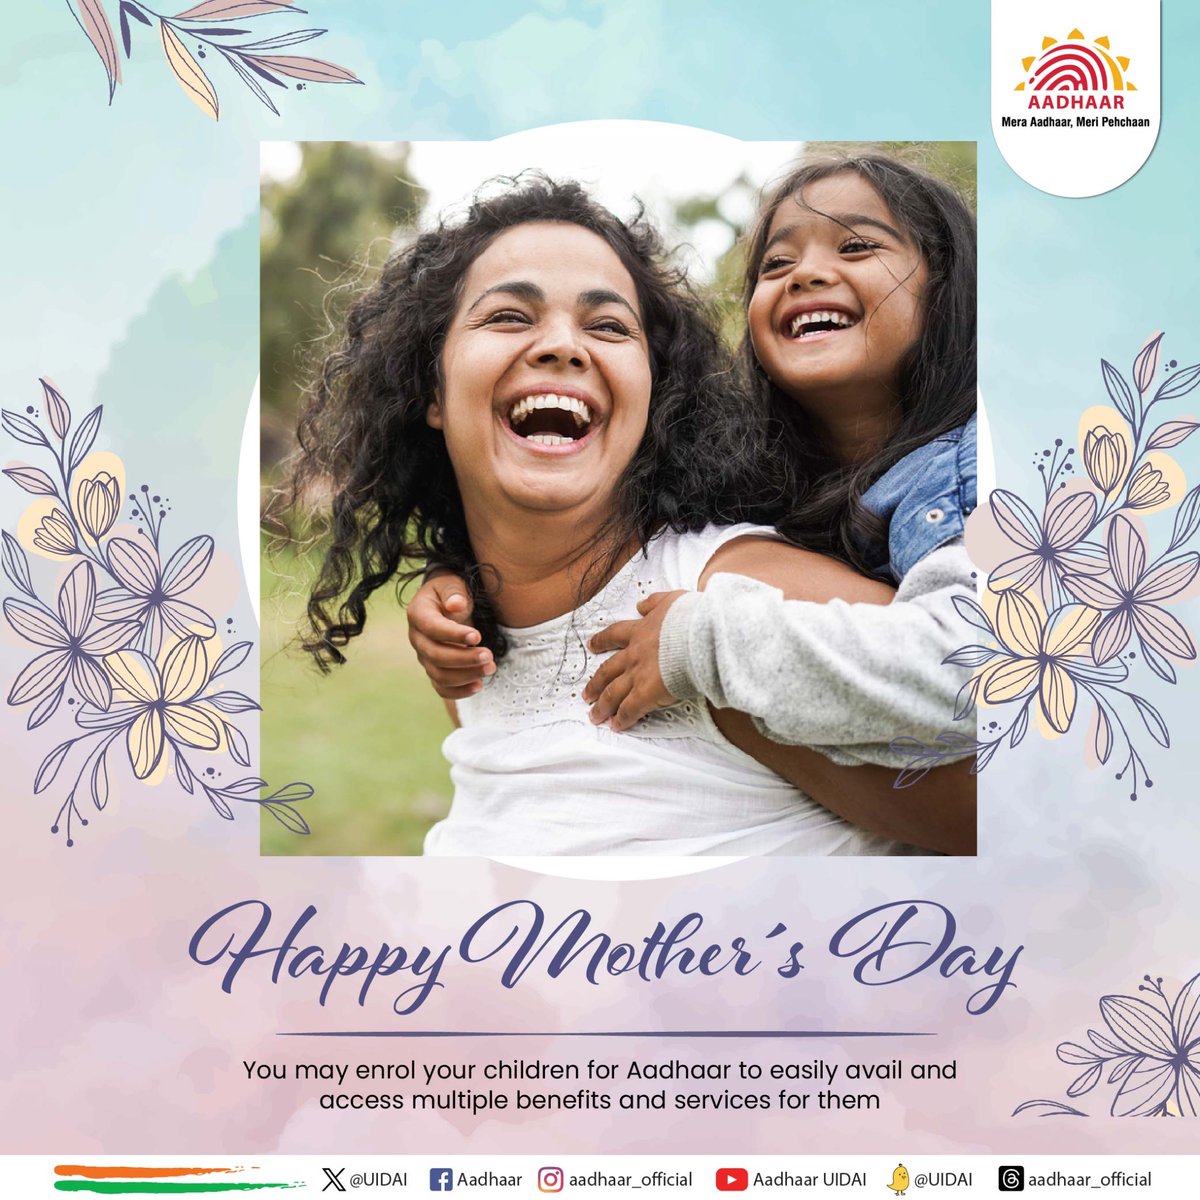 To all the incredible mothers, #Aadhaar wishes a #HappyMother'sDay